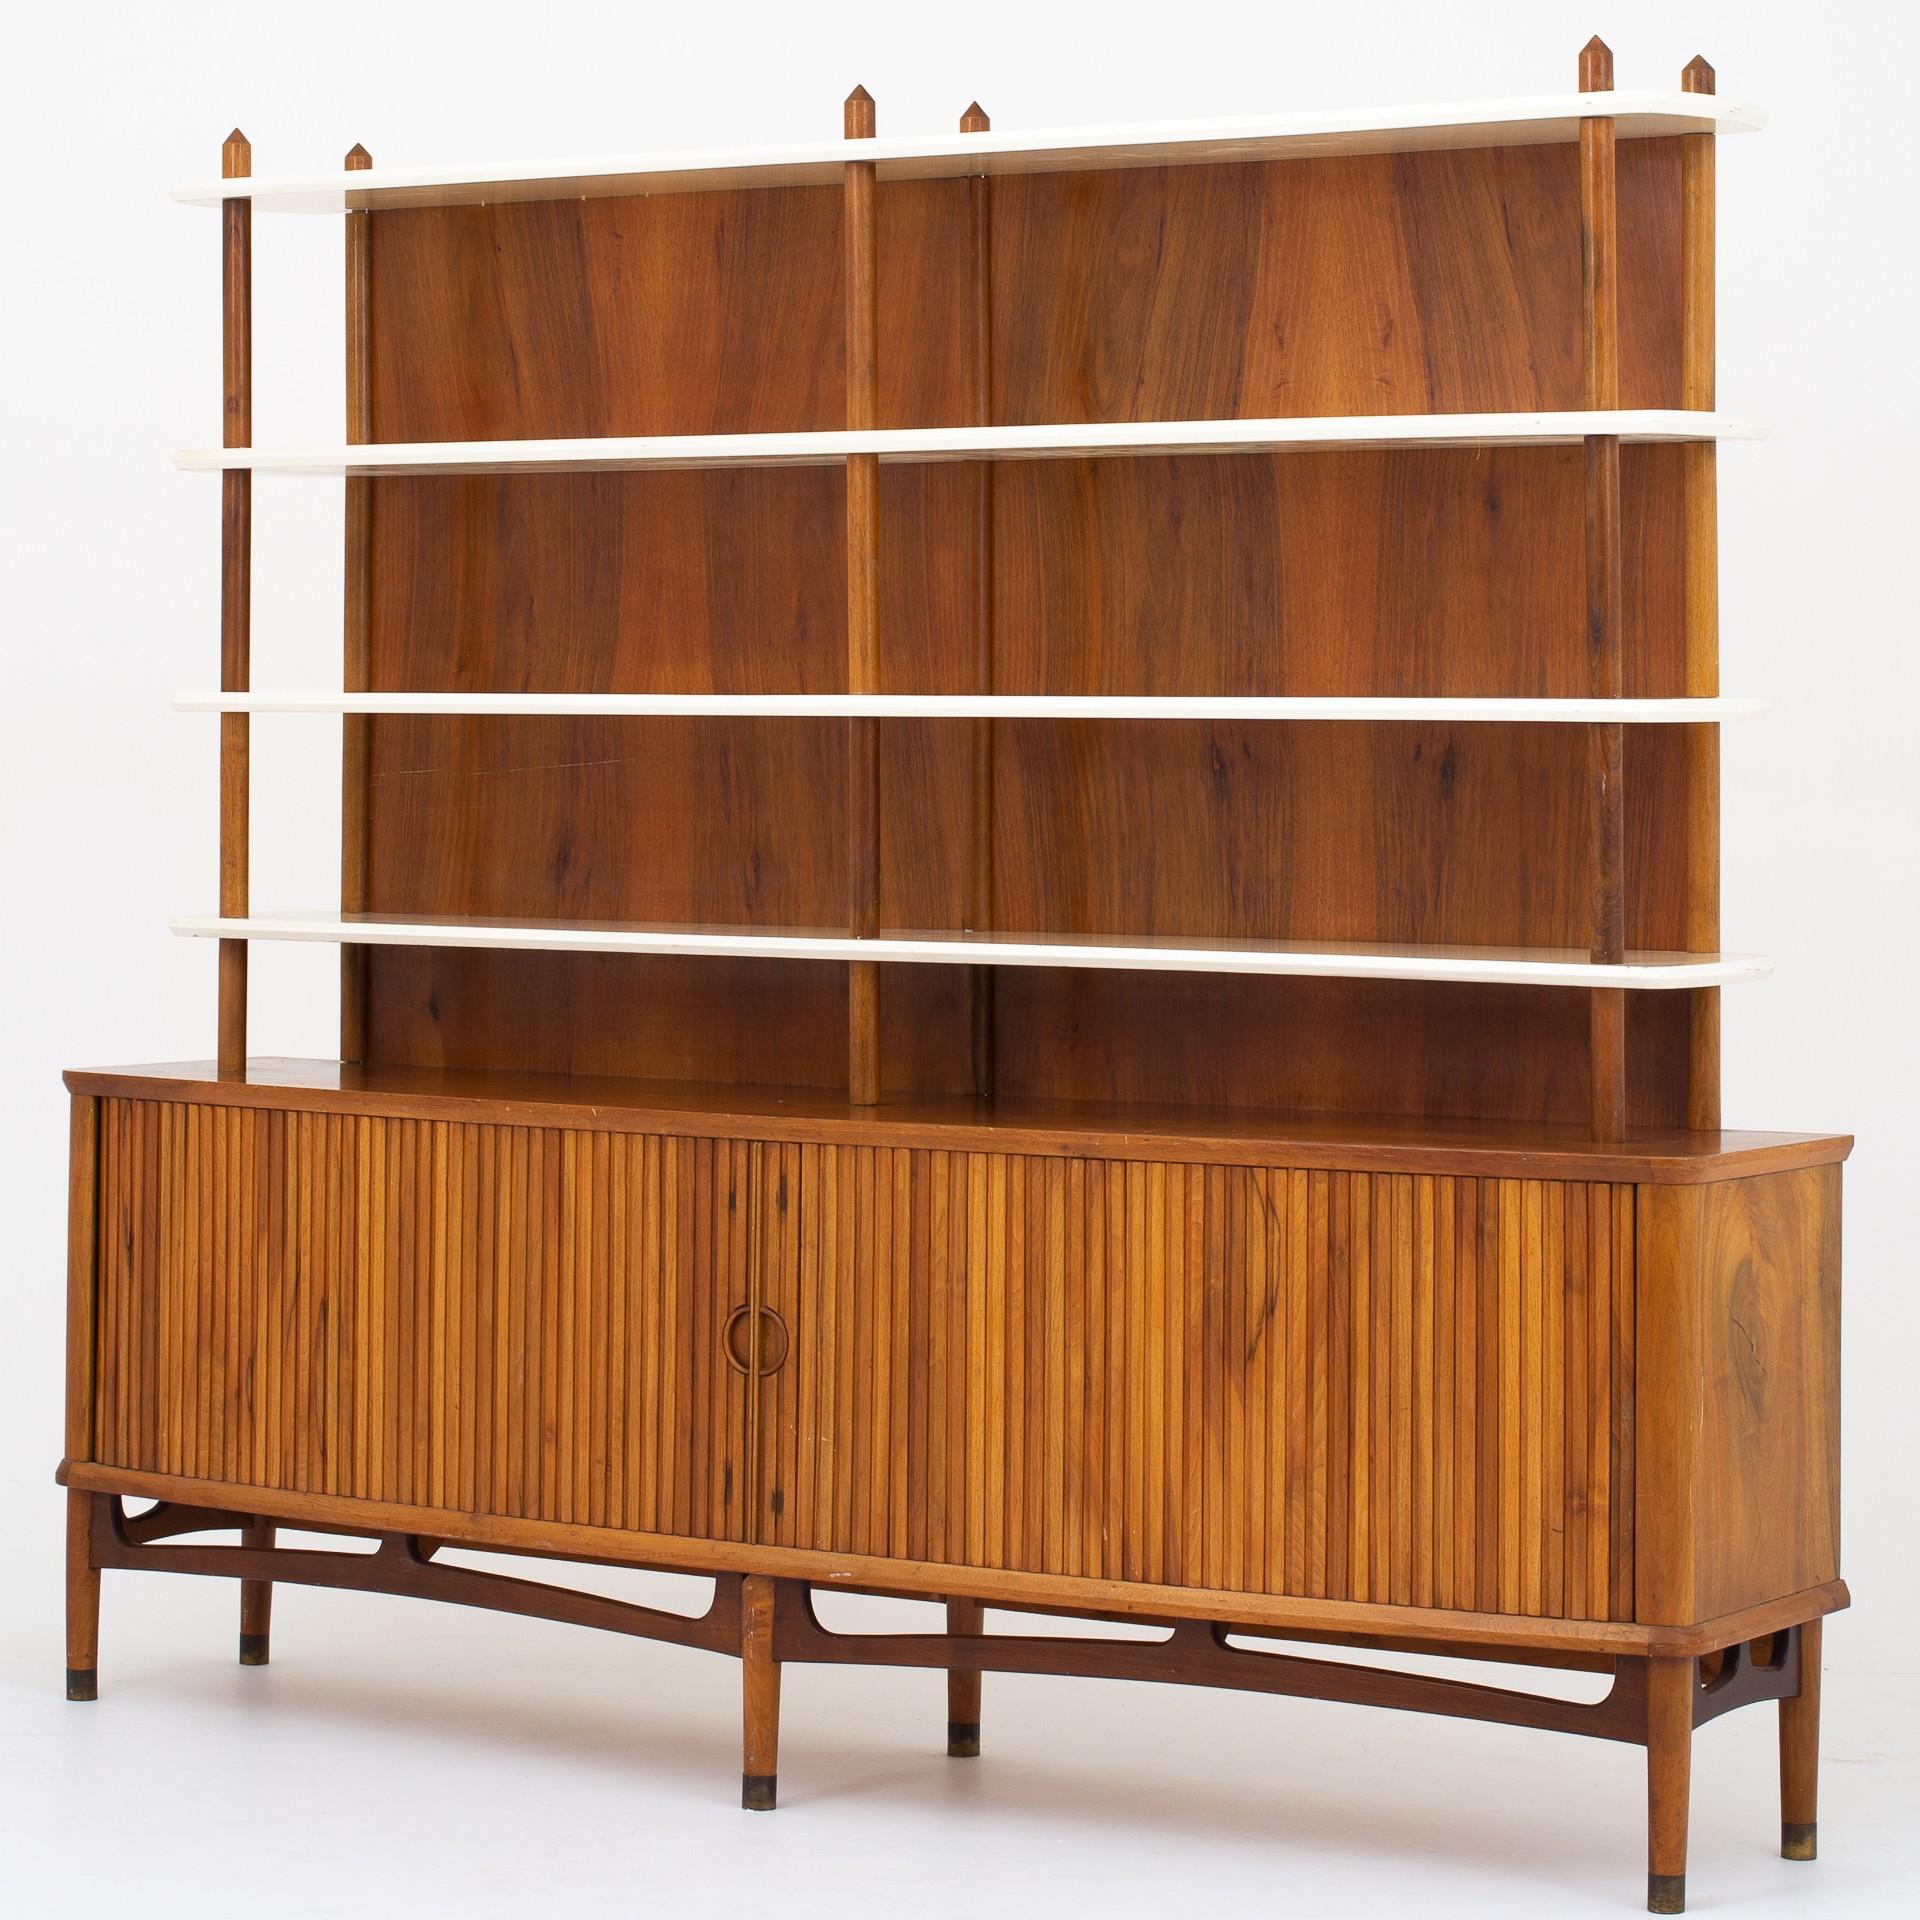 Sideboard with shelving, varnished walnut veneer, tambour doors. Top section with white-lacquered shelves and tapered pillars, base with slightly bowed front and two tambour doors enclosing shelves and sliding trays. Maker A. Andersen & Bohm.